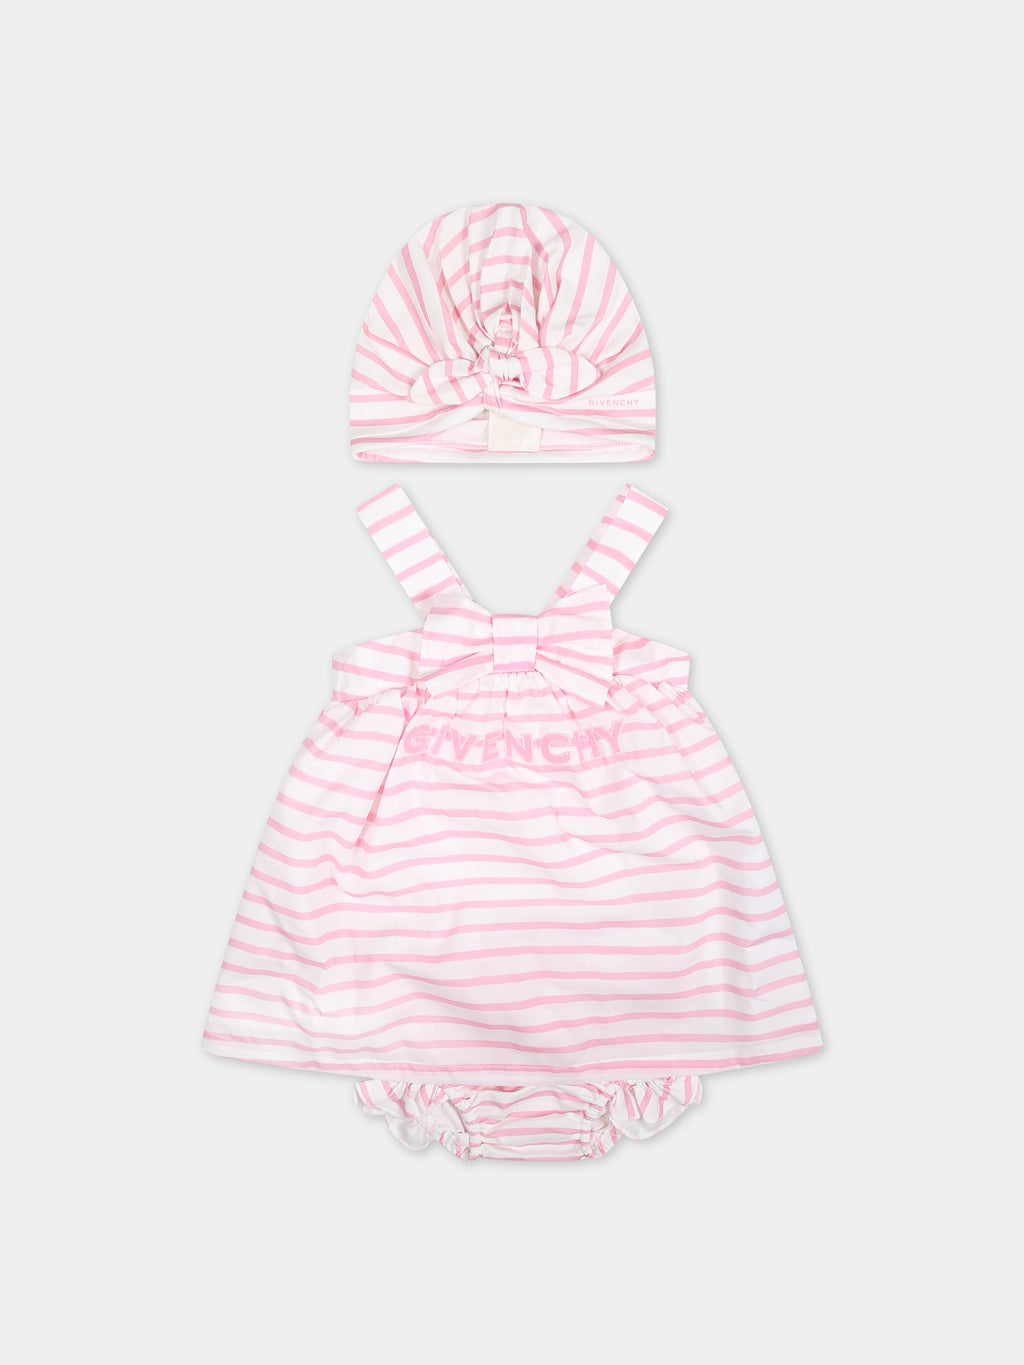 Pink dress for baby girl with stripes